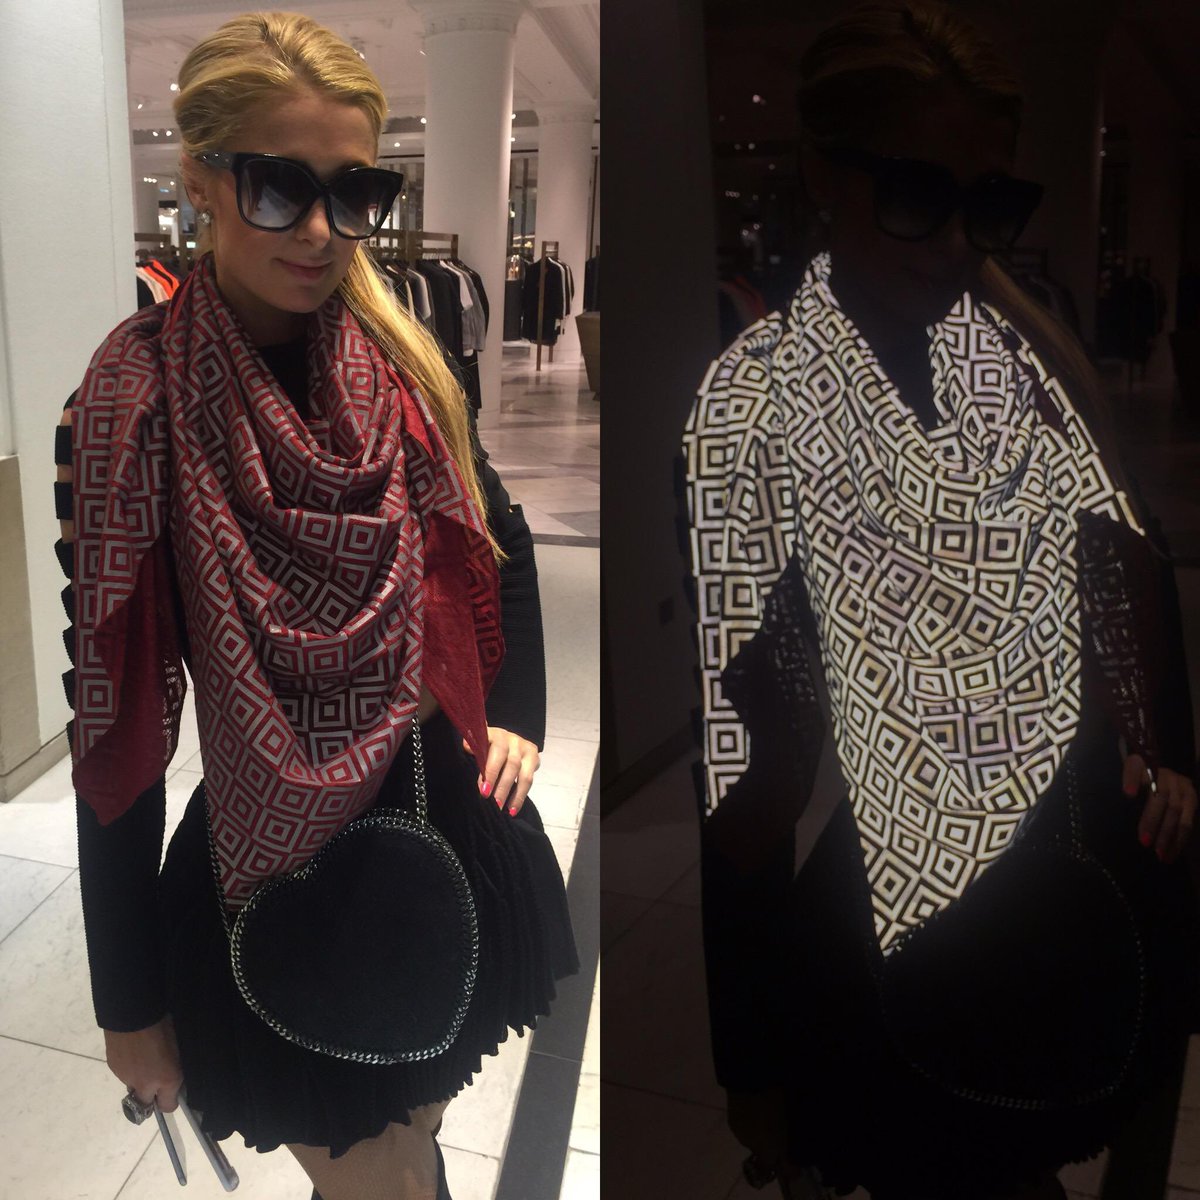 paris hilton wearing an anti-paparazzi
scarf that ruins pictures by affecting flash photography